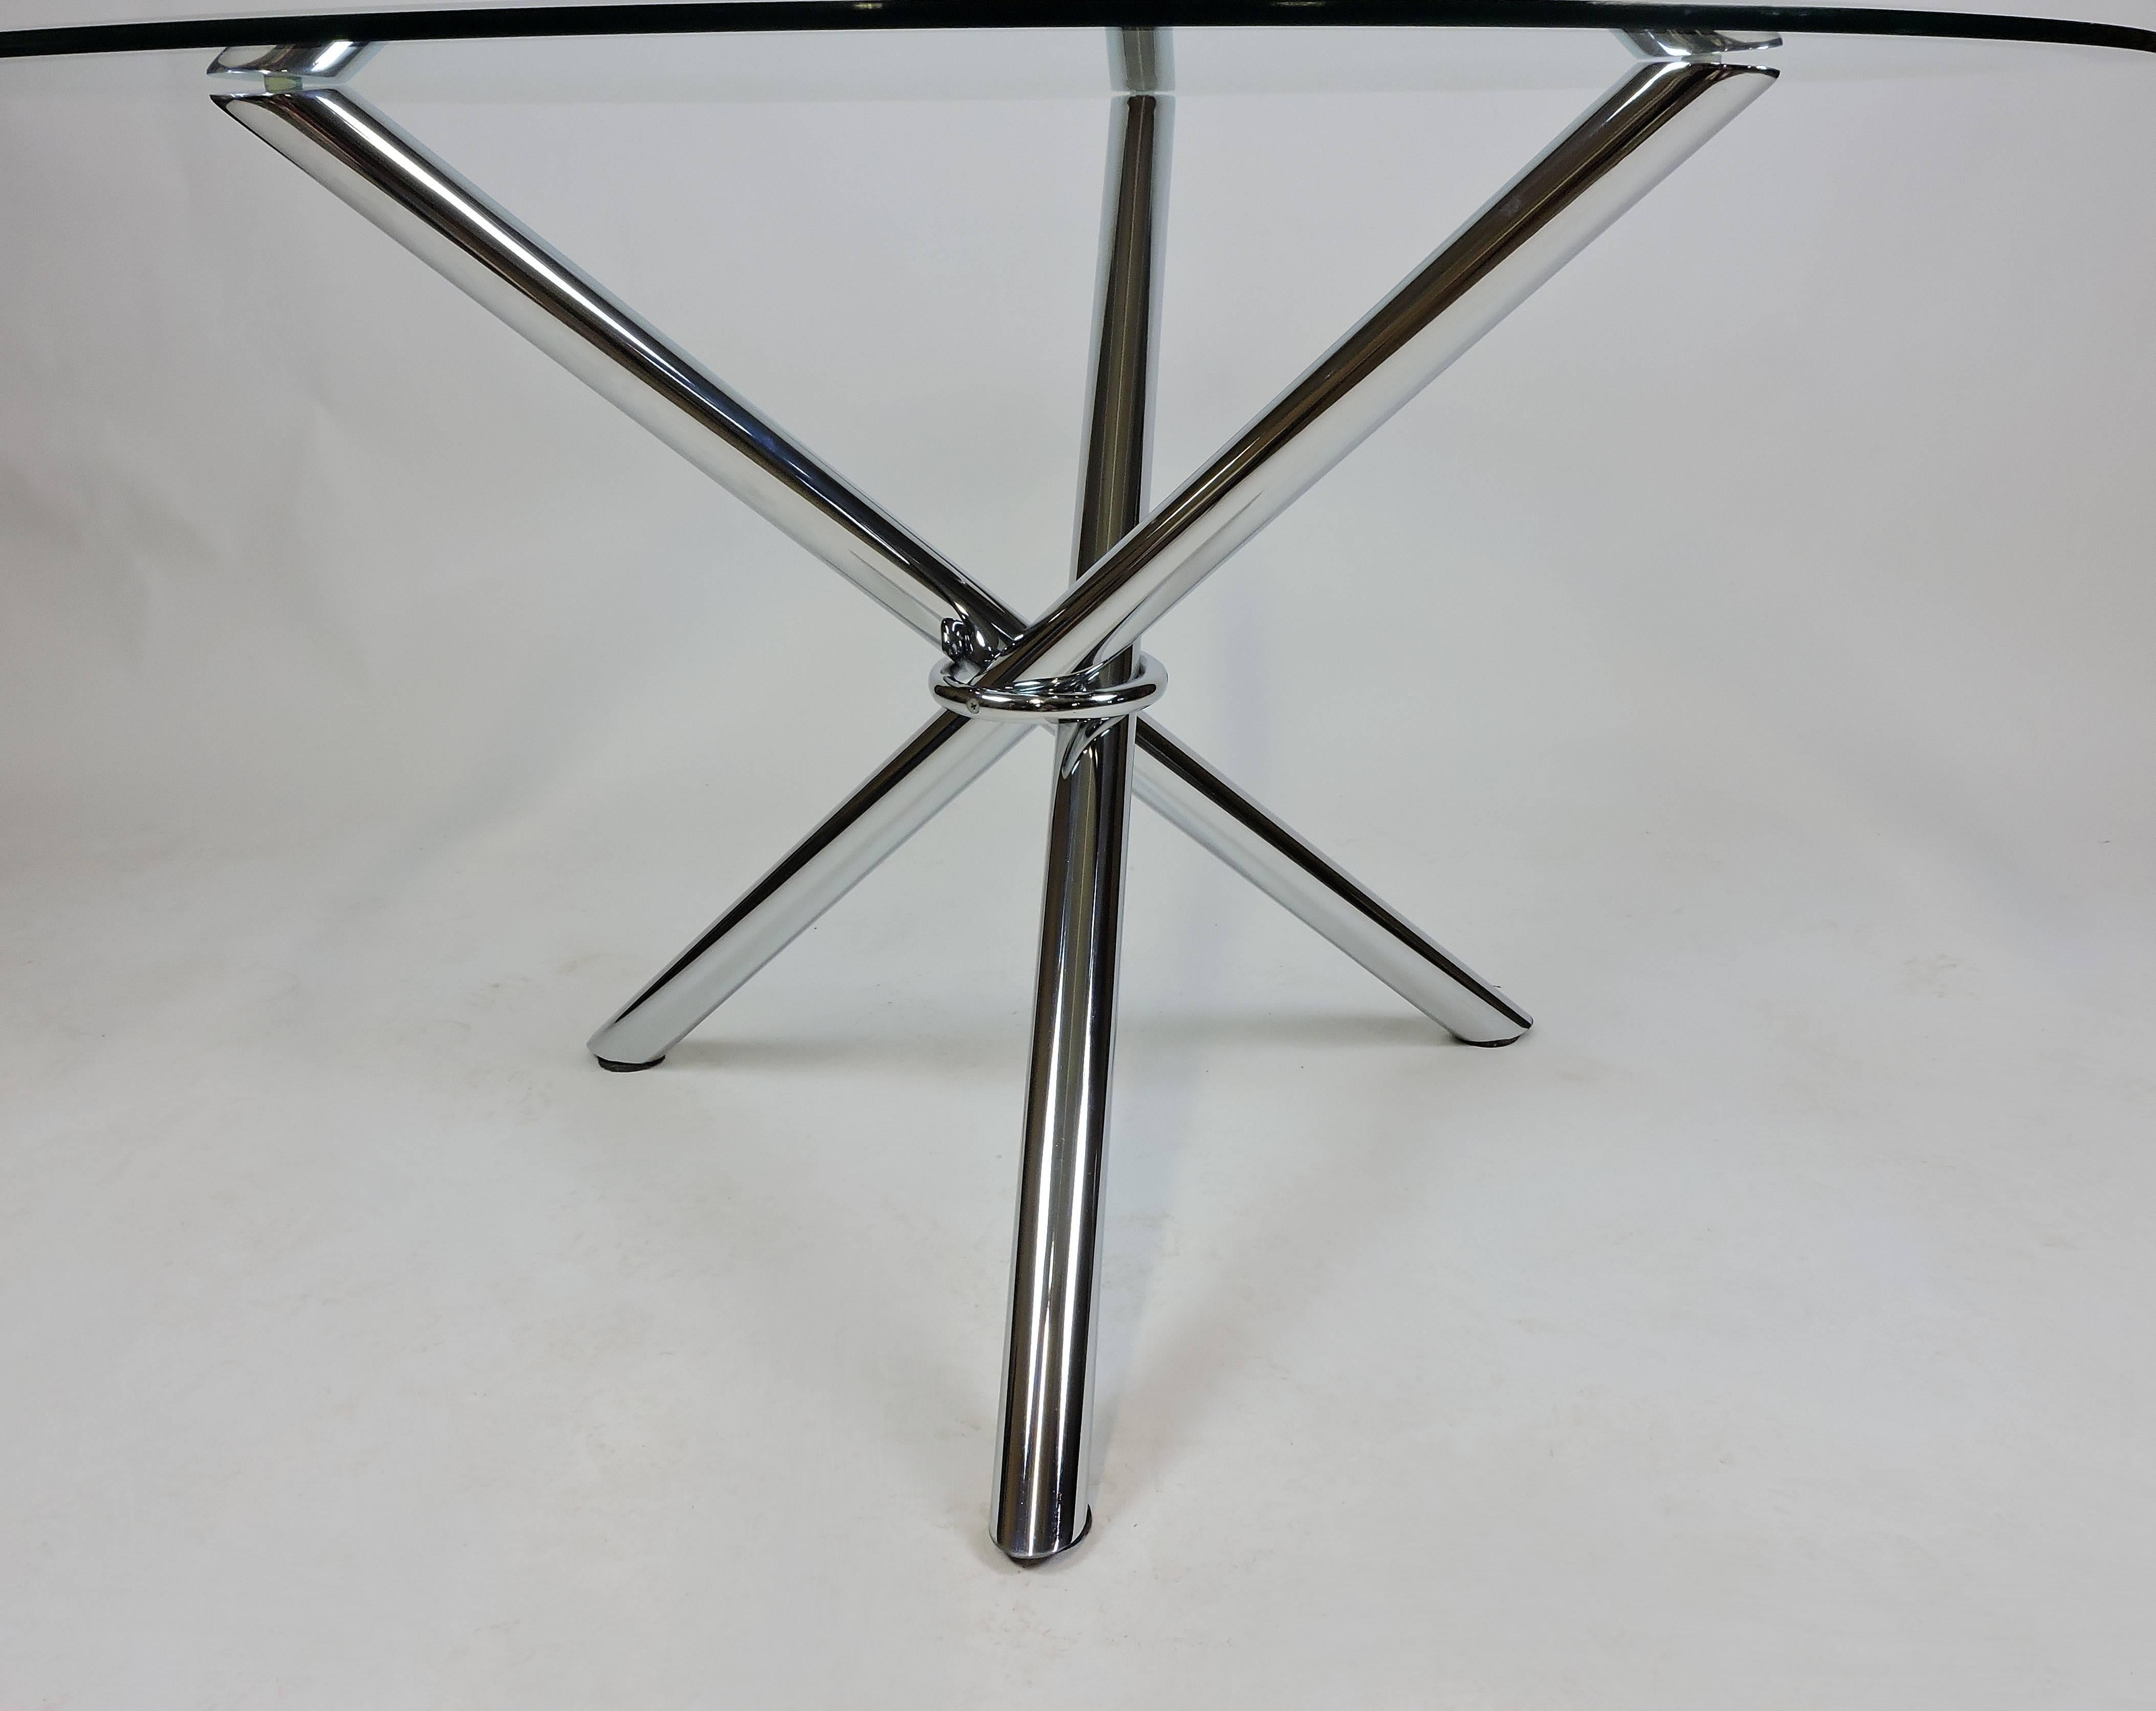 Very cool dining table reminiscent of the Jax coffee table by Milo Baughman. This table has a tripod tubular chrome base with a circular bevelled half-inch thick glass top. Seats four comfortably. Would also make a striking centre hall table.